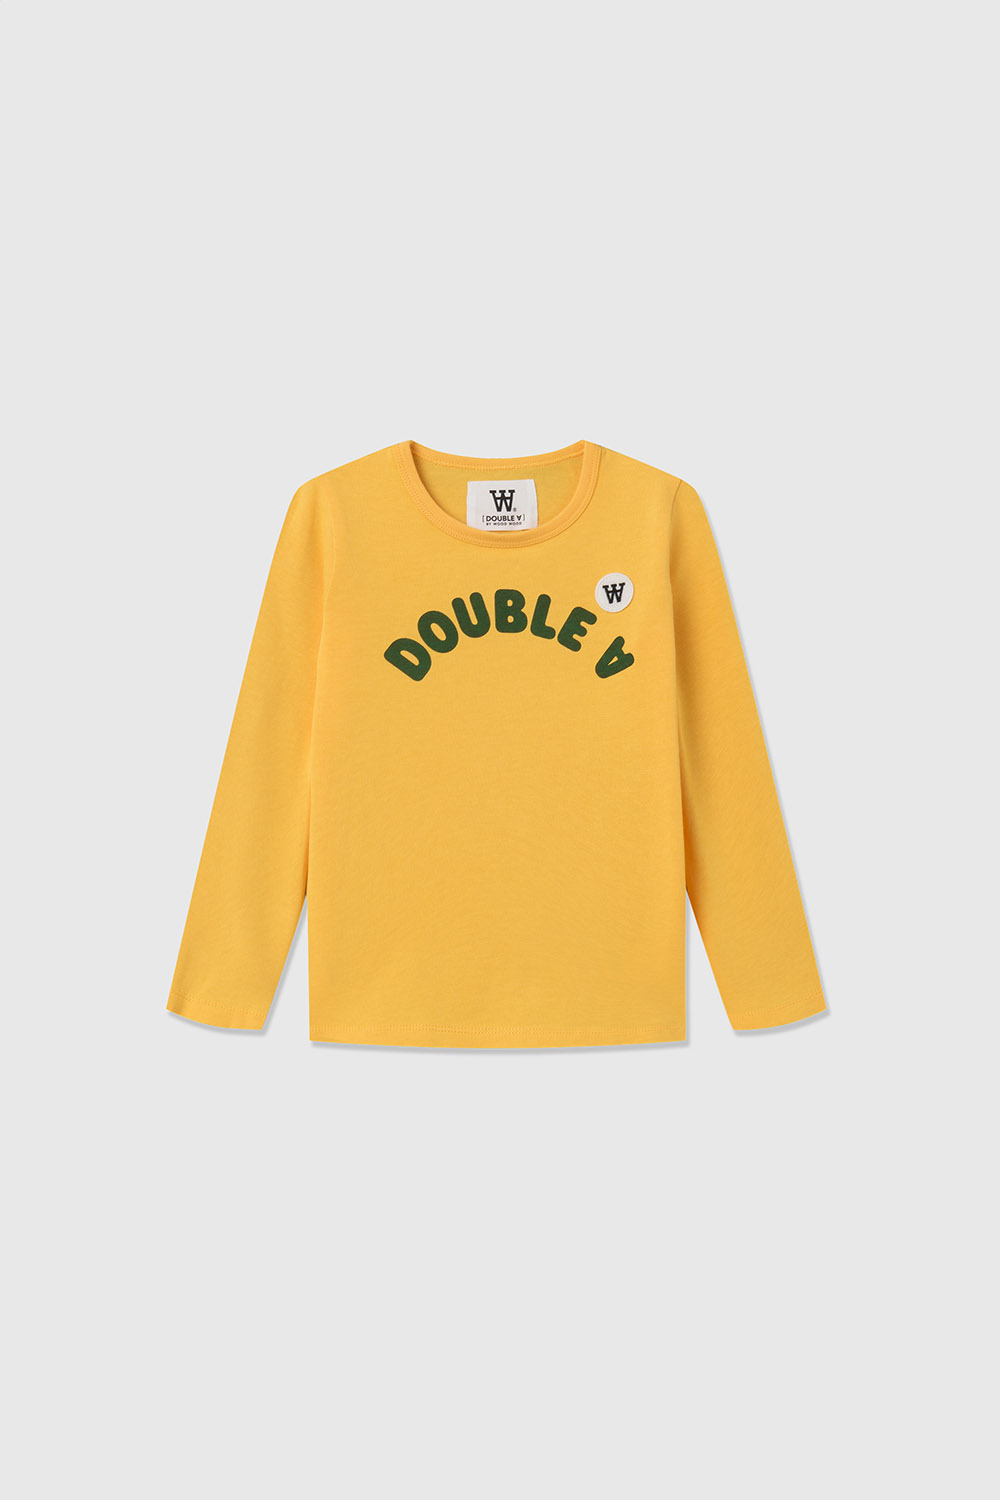 Double A by Wood Wood Kim Arch kids LS Sunflower | WoodWood.com